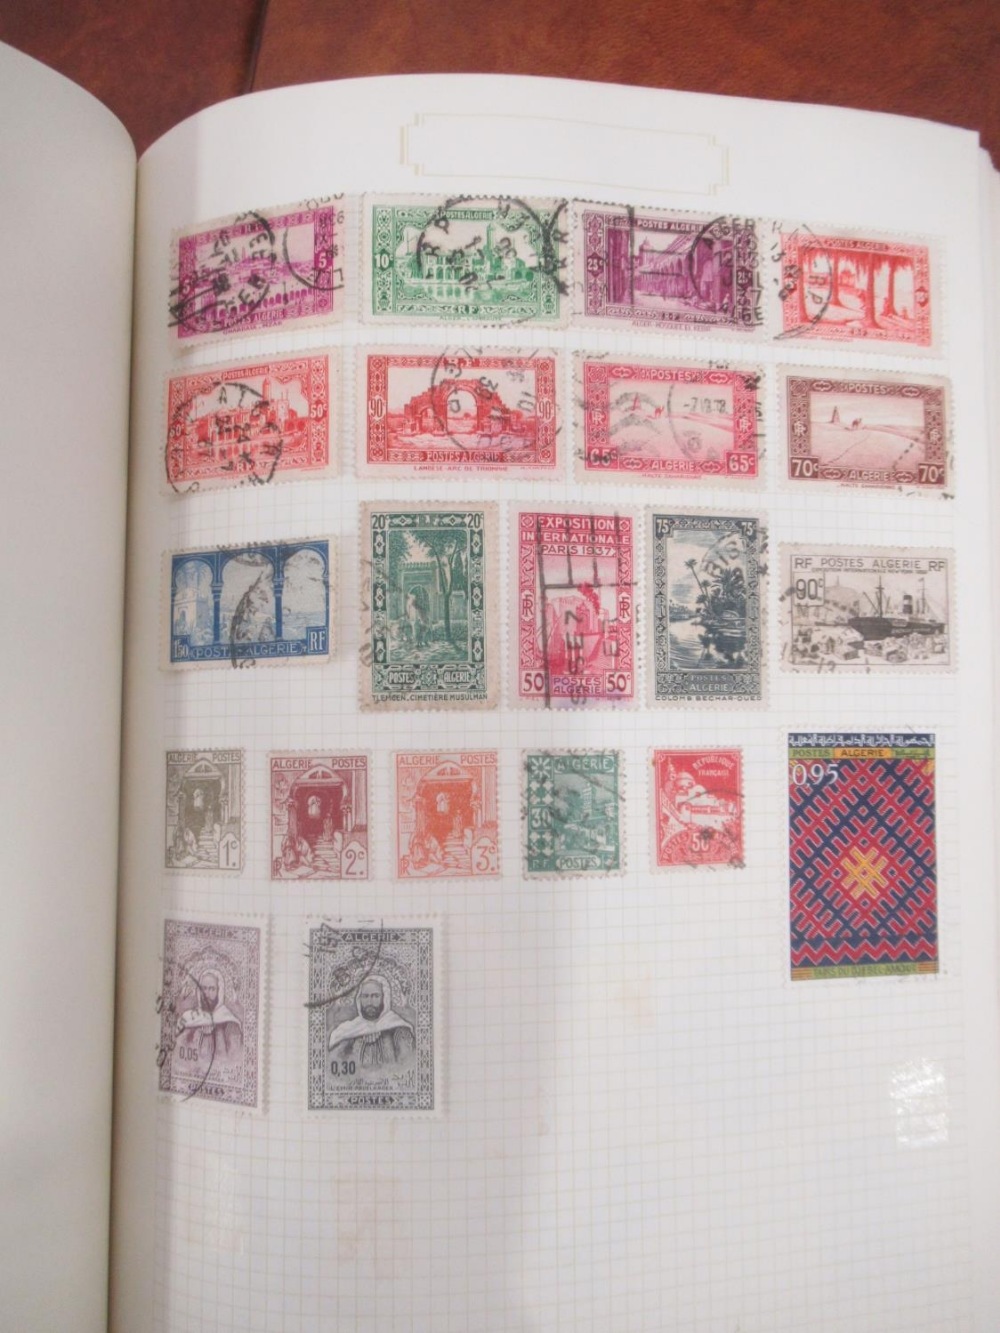 Red The Derwent Stamp Album cont. 4 used penny reds, GB & mixed International stamps, blue The - Image 7 of 11